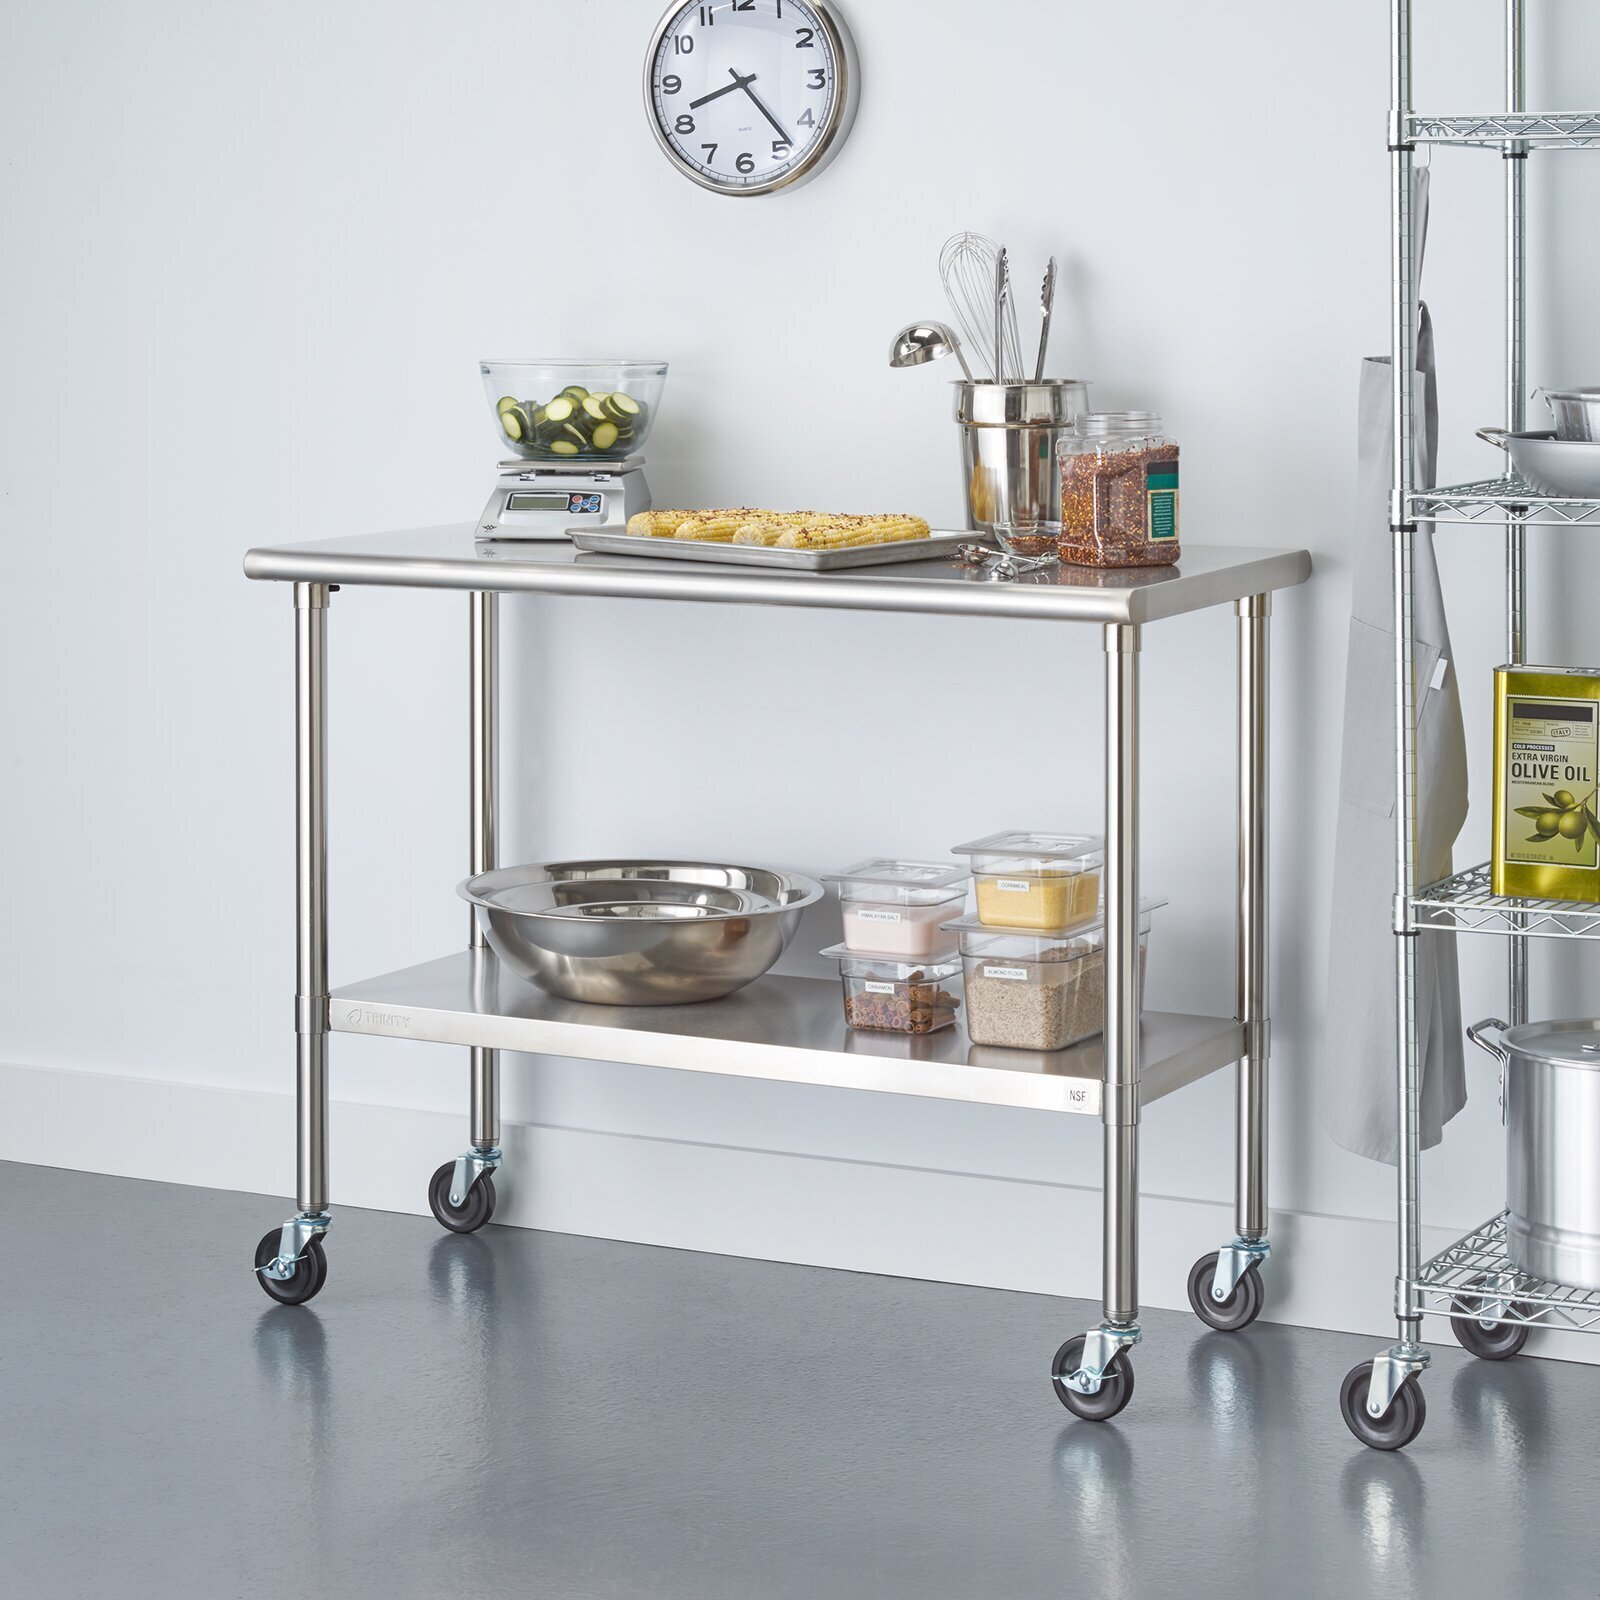 Stainless steel rolling cart with lower shelf